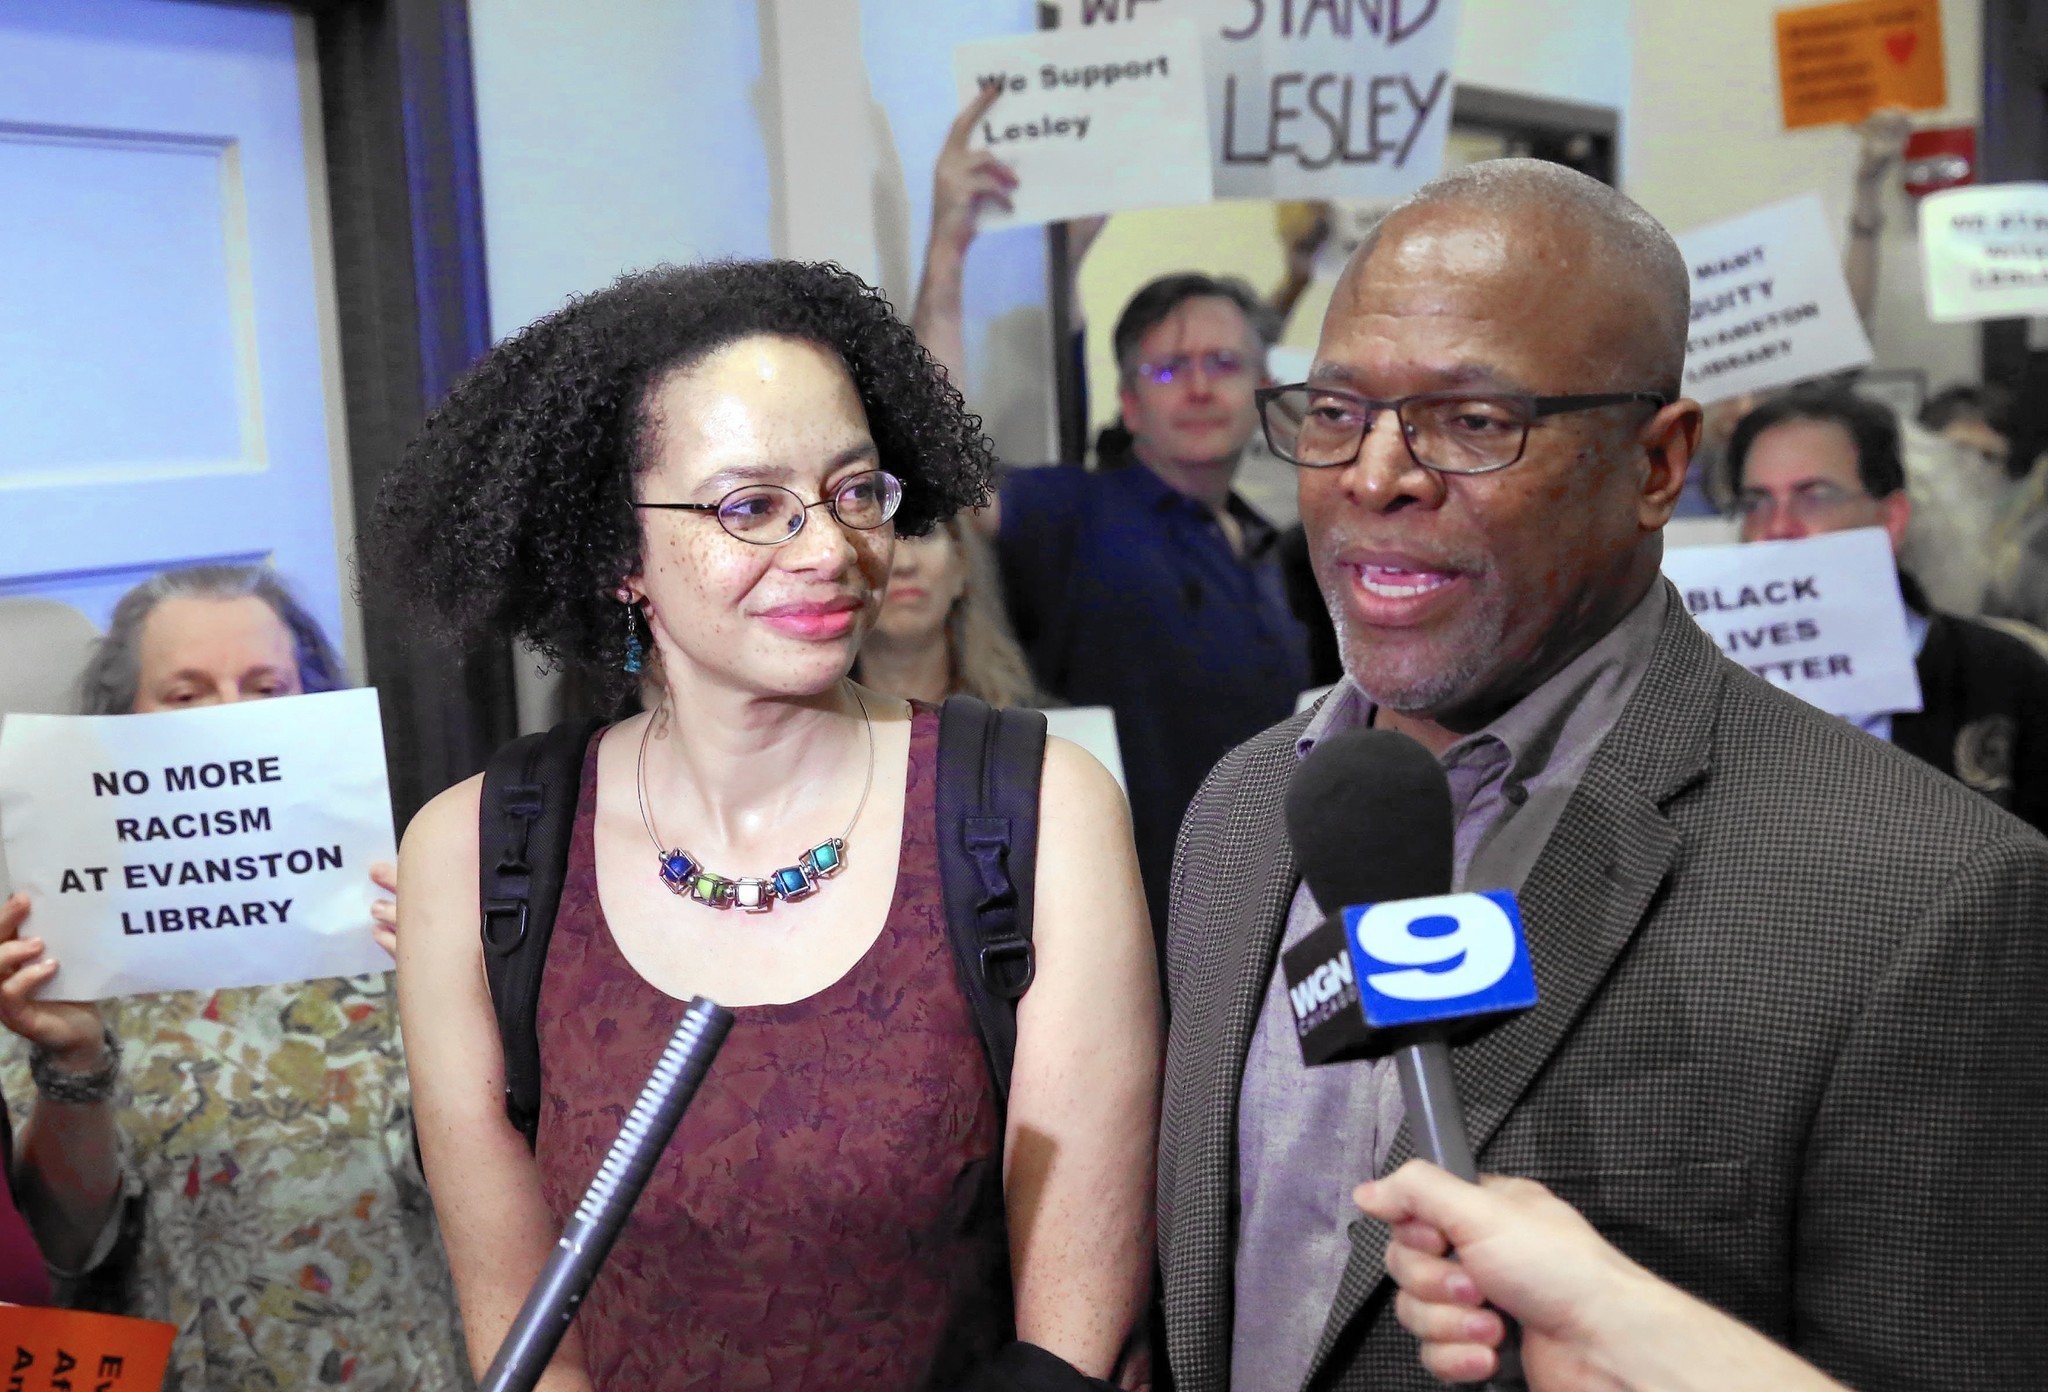 Dozens rally for Evanston's only African American librarian in work dispute